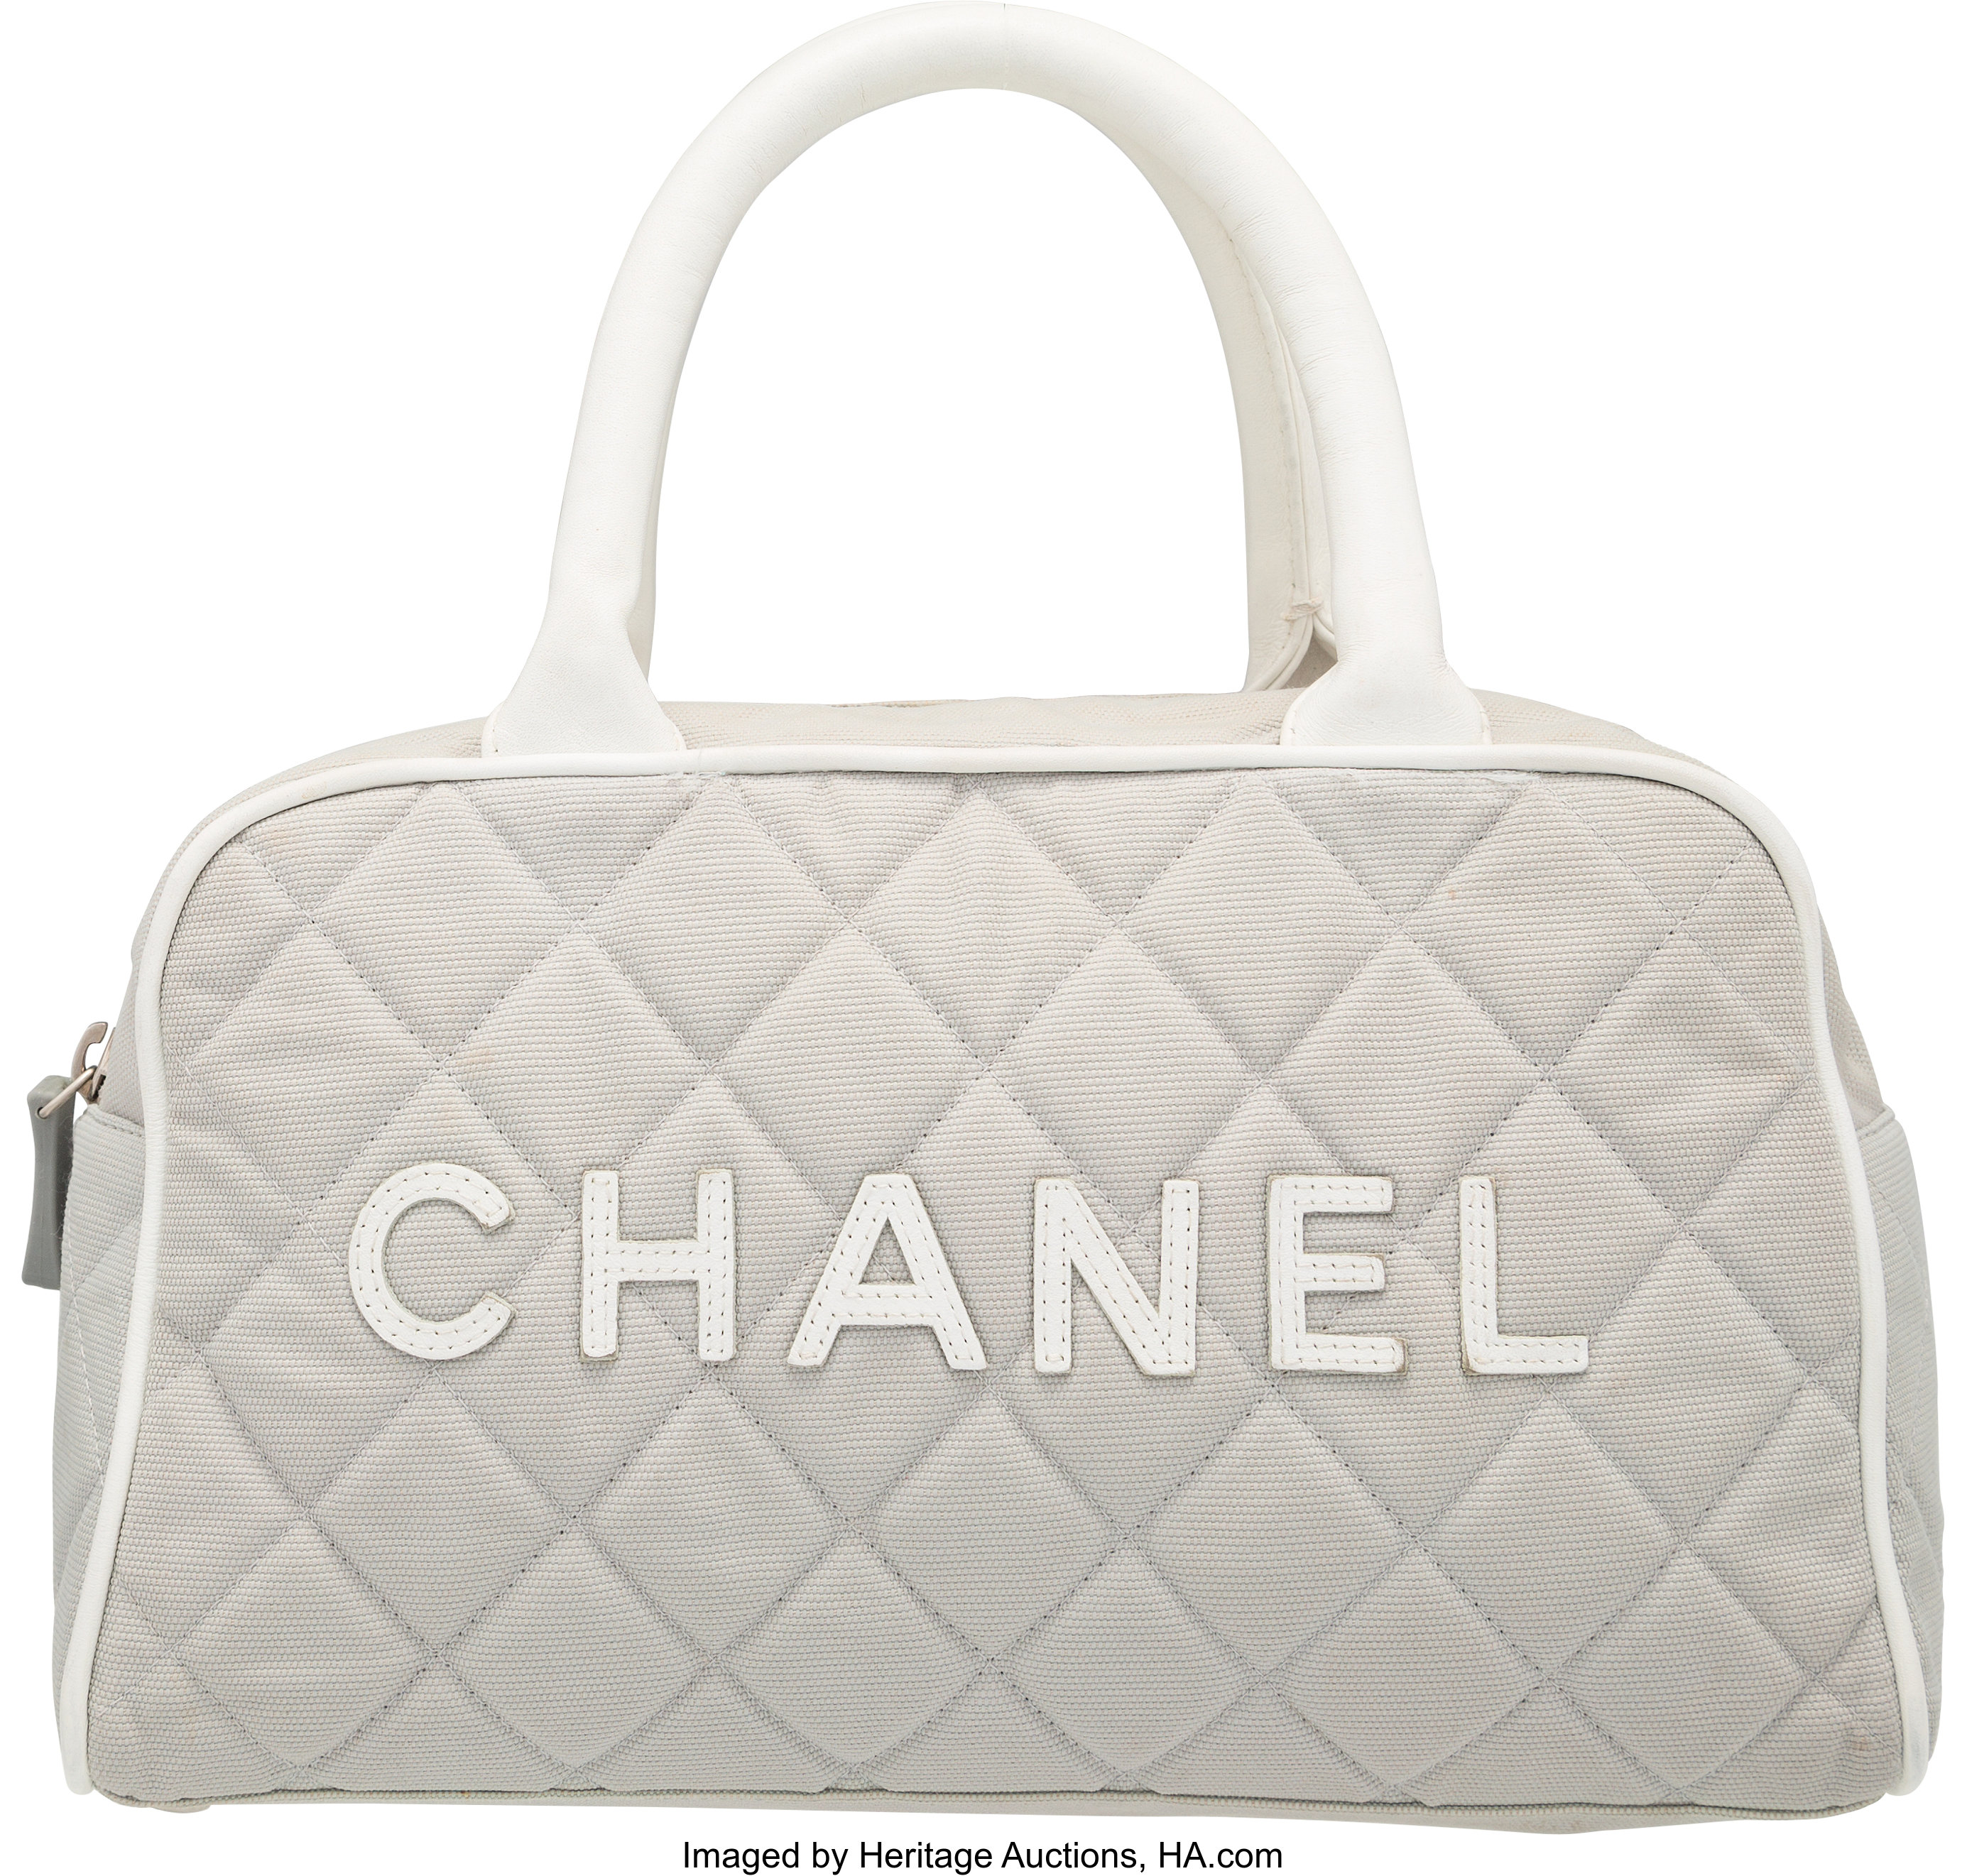 Chanel Ice White Leather Bowler Bag - Vintage Lux